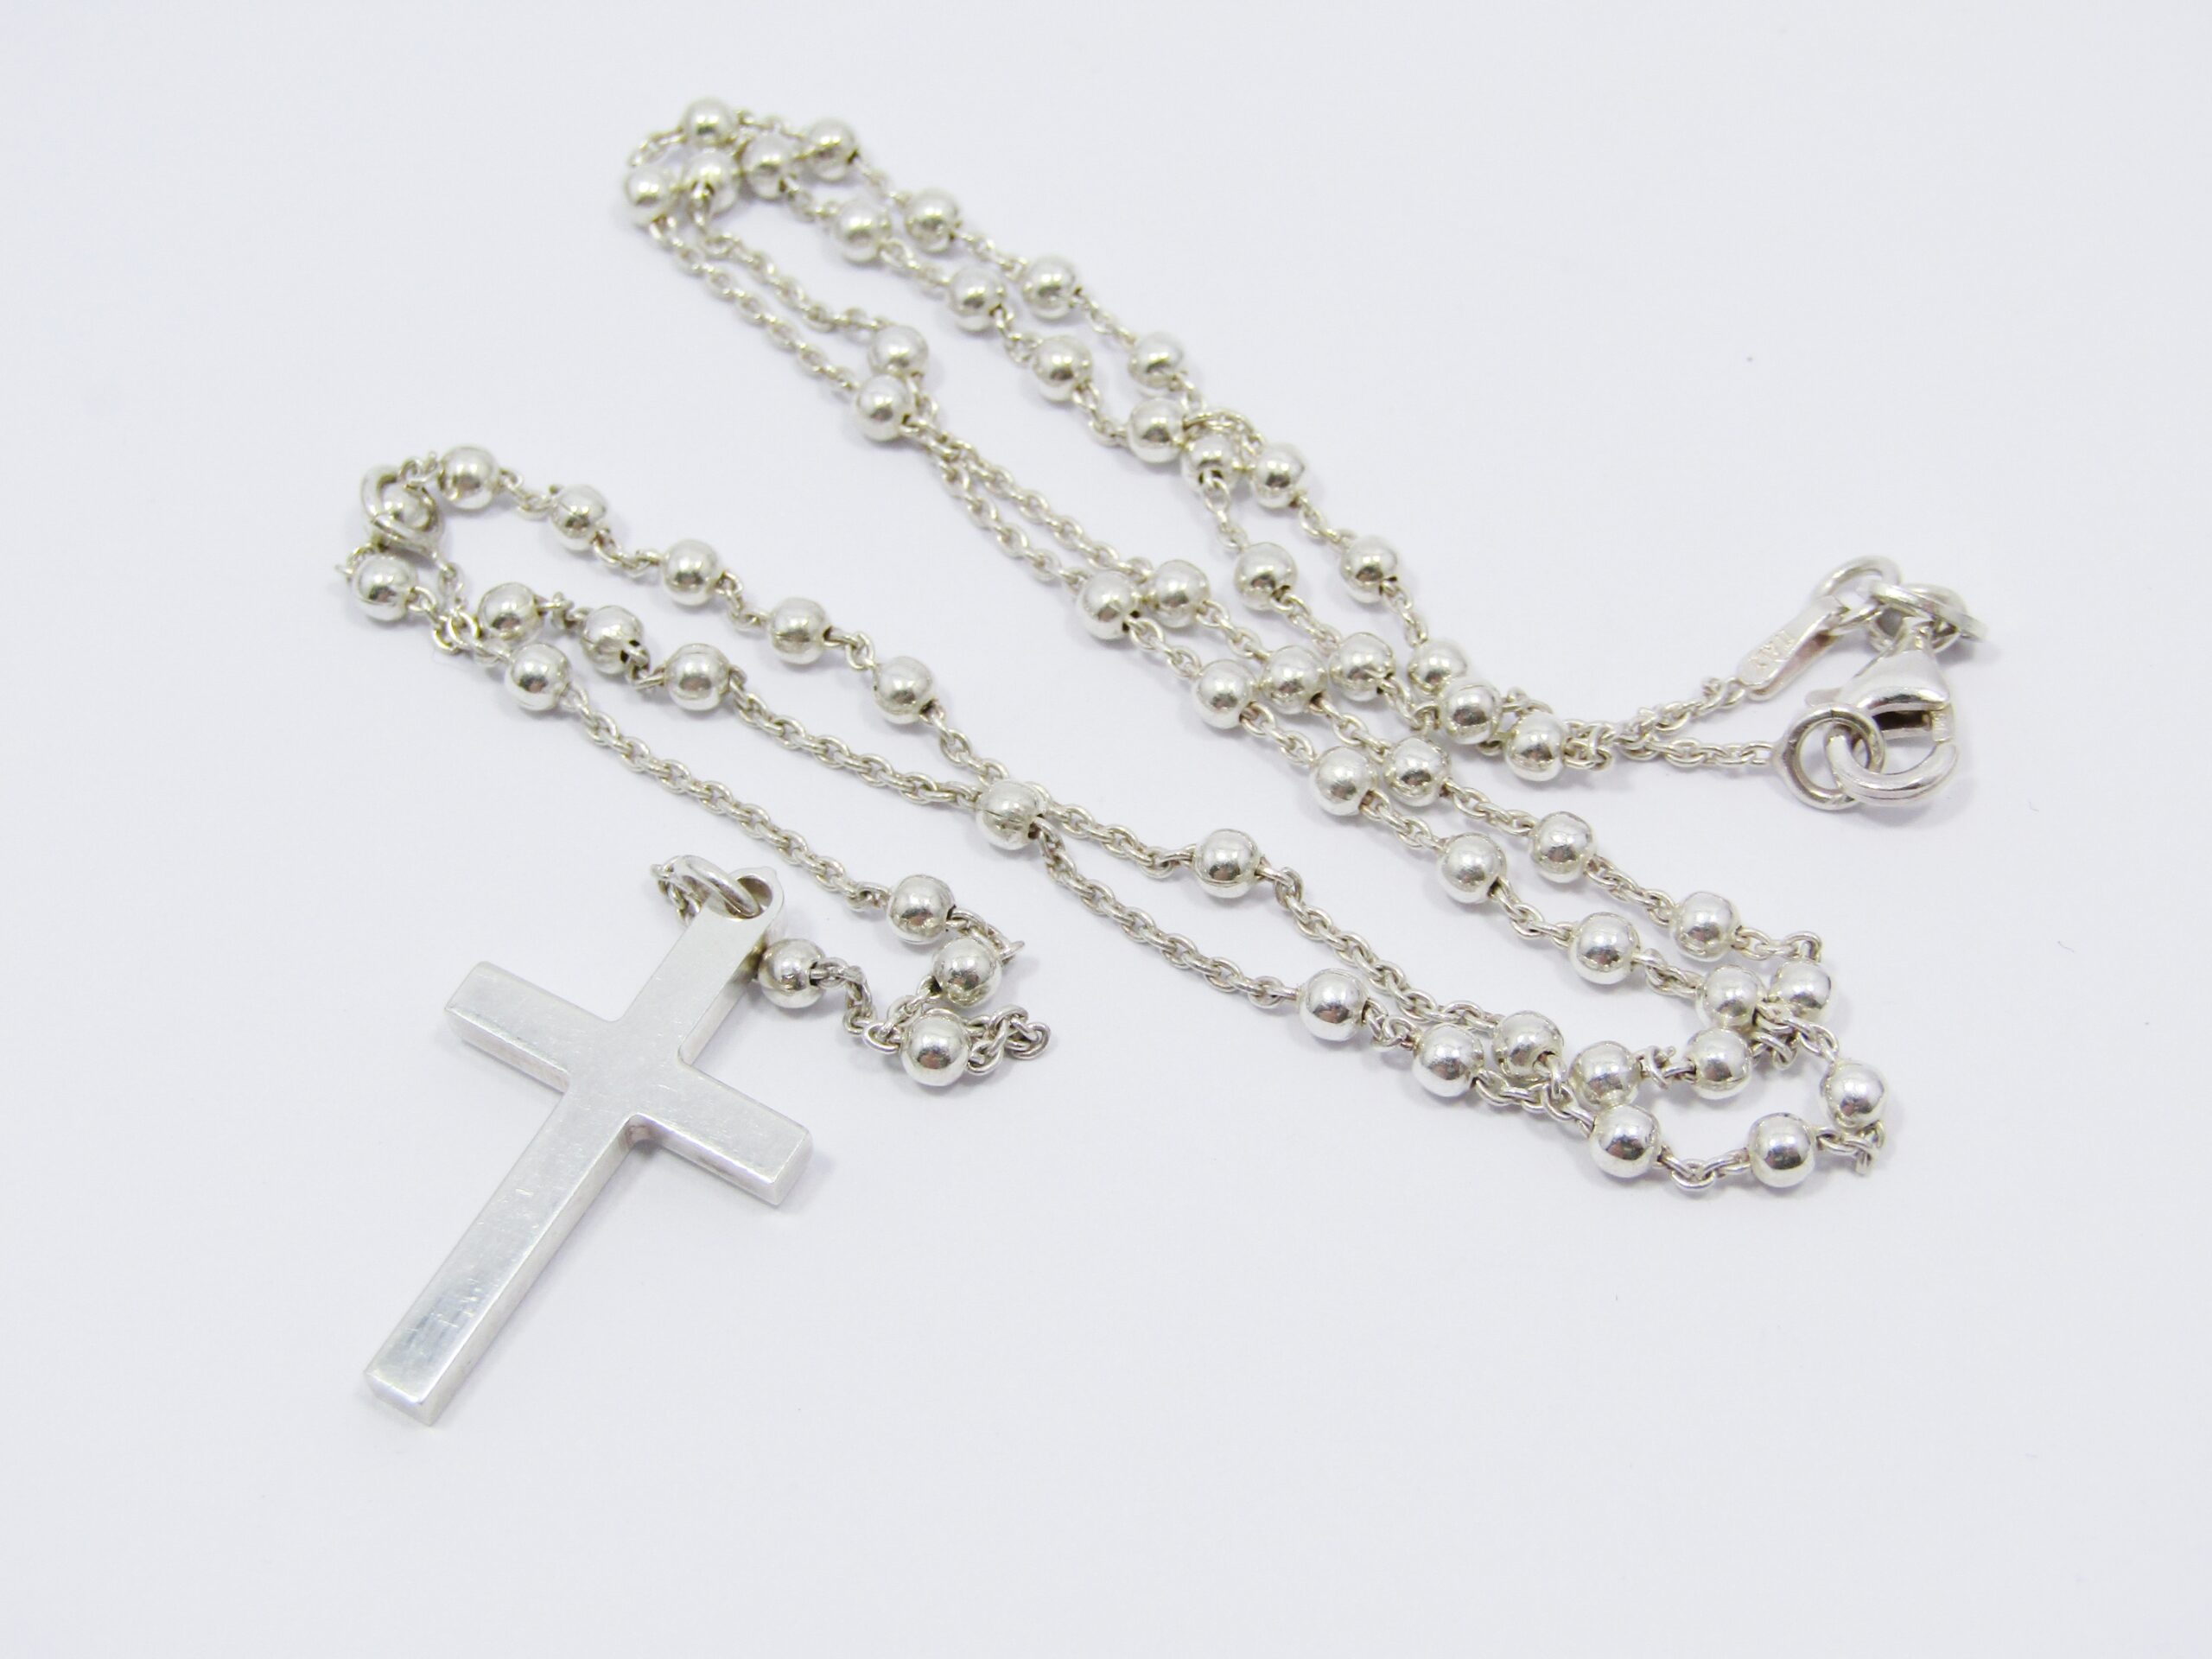 A Gorgeous Dainty Rosary in Sterling Silver.